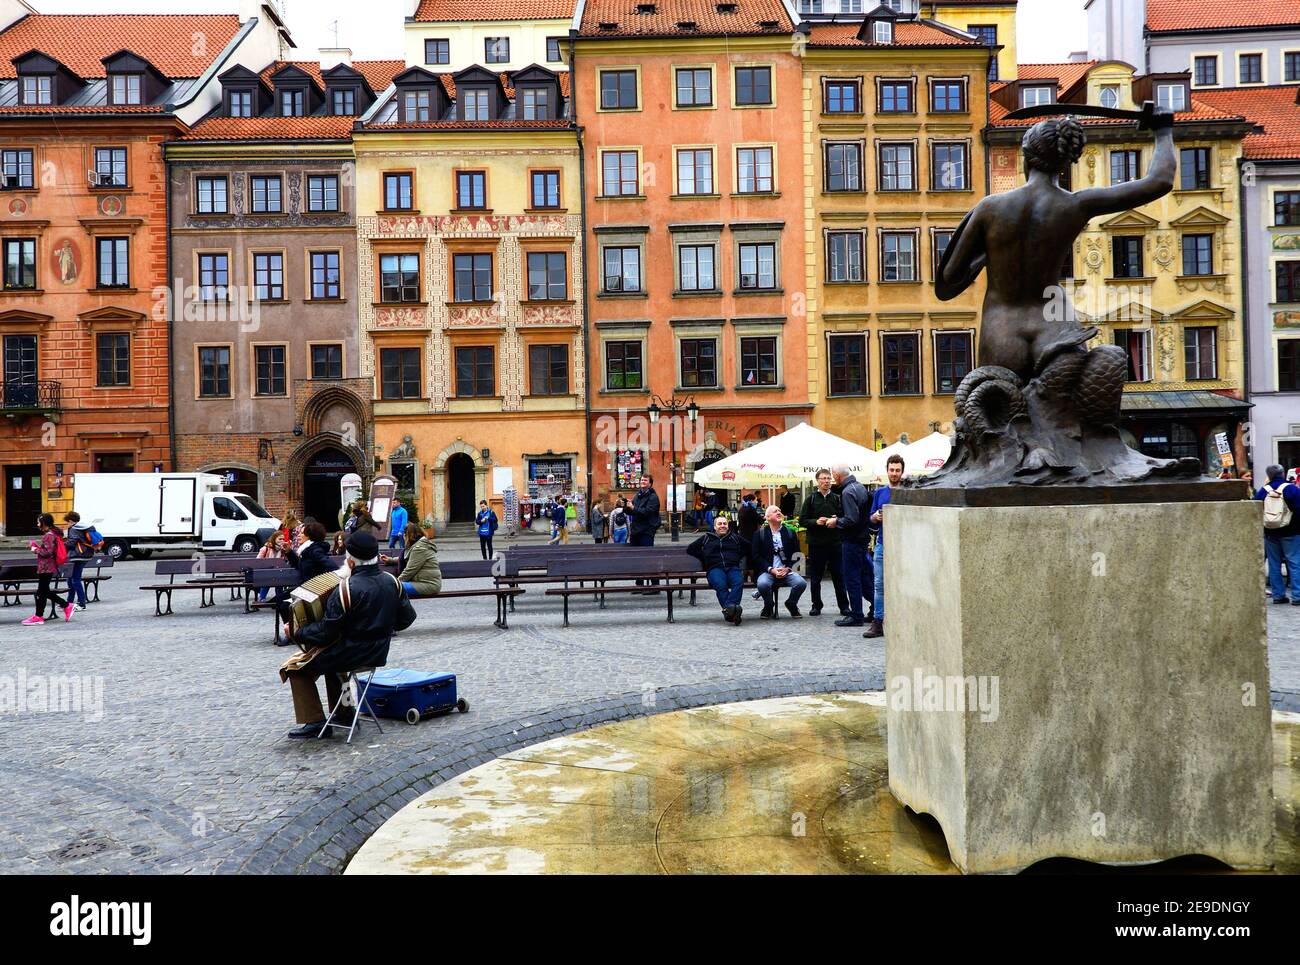 Old Town Market Place on right statue of Syrenka (little mermaid), Warsaw, Poland, Europe Stock Photo